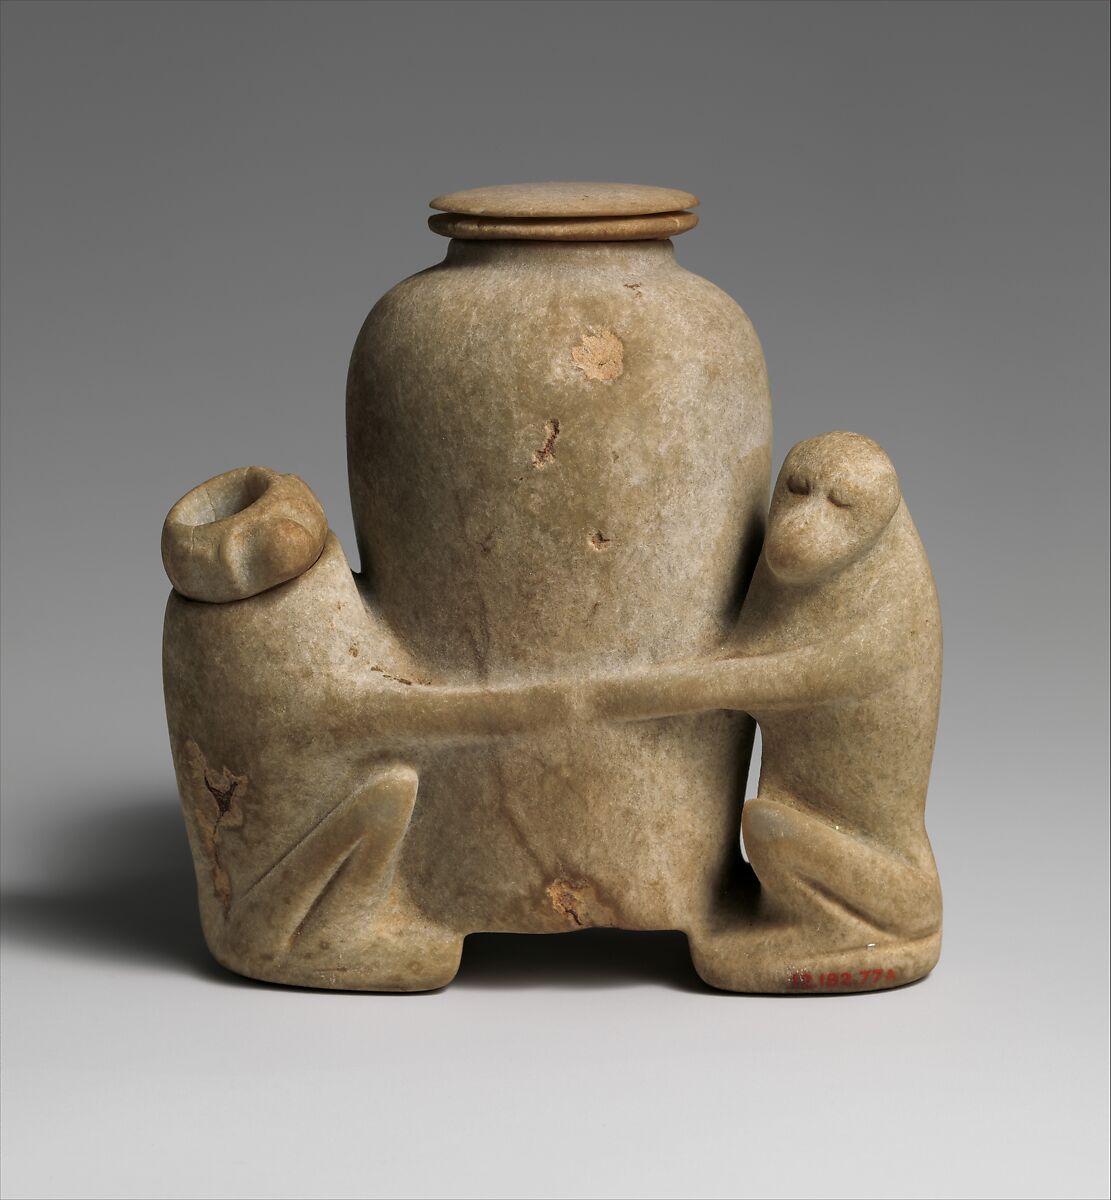 Ointment vessel in the shape of two baboons holding a jar, Anhydrite